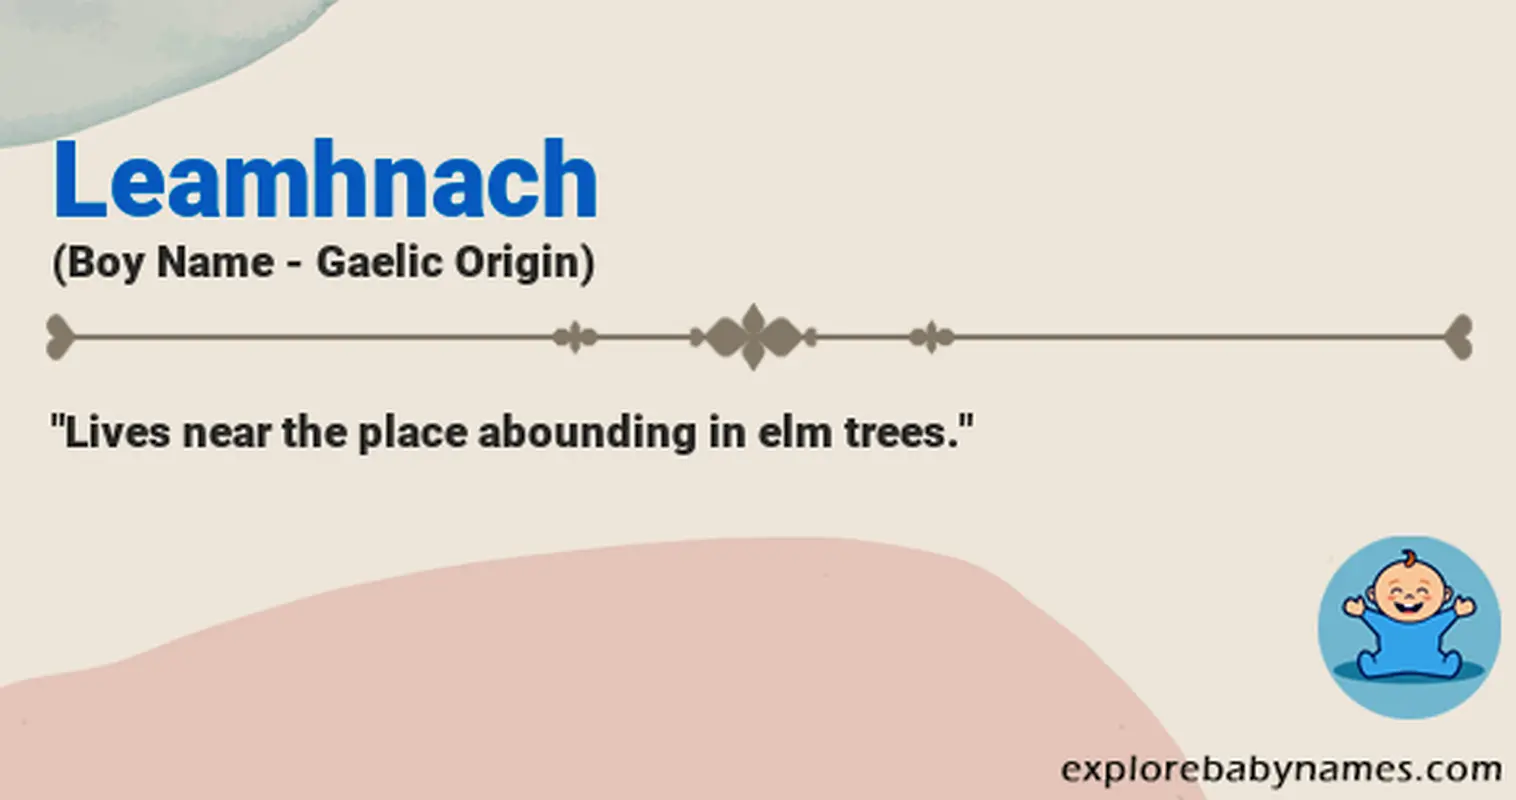 Meaning of Leamhnach